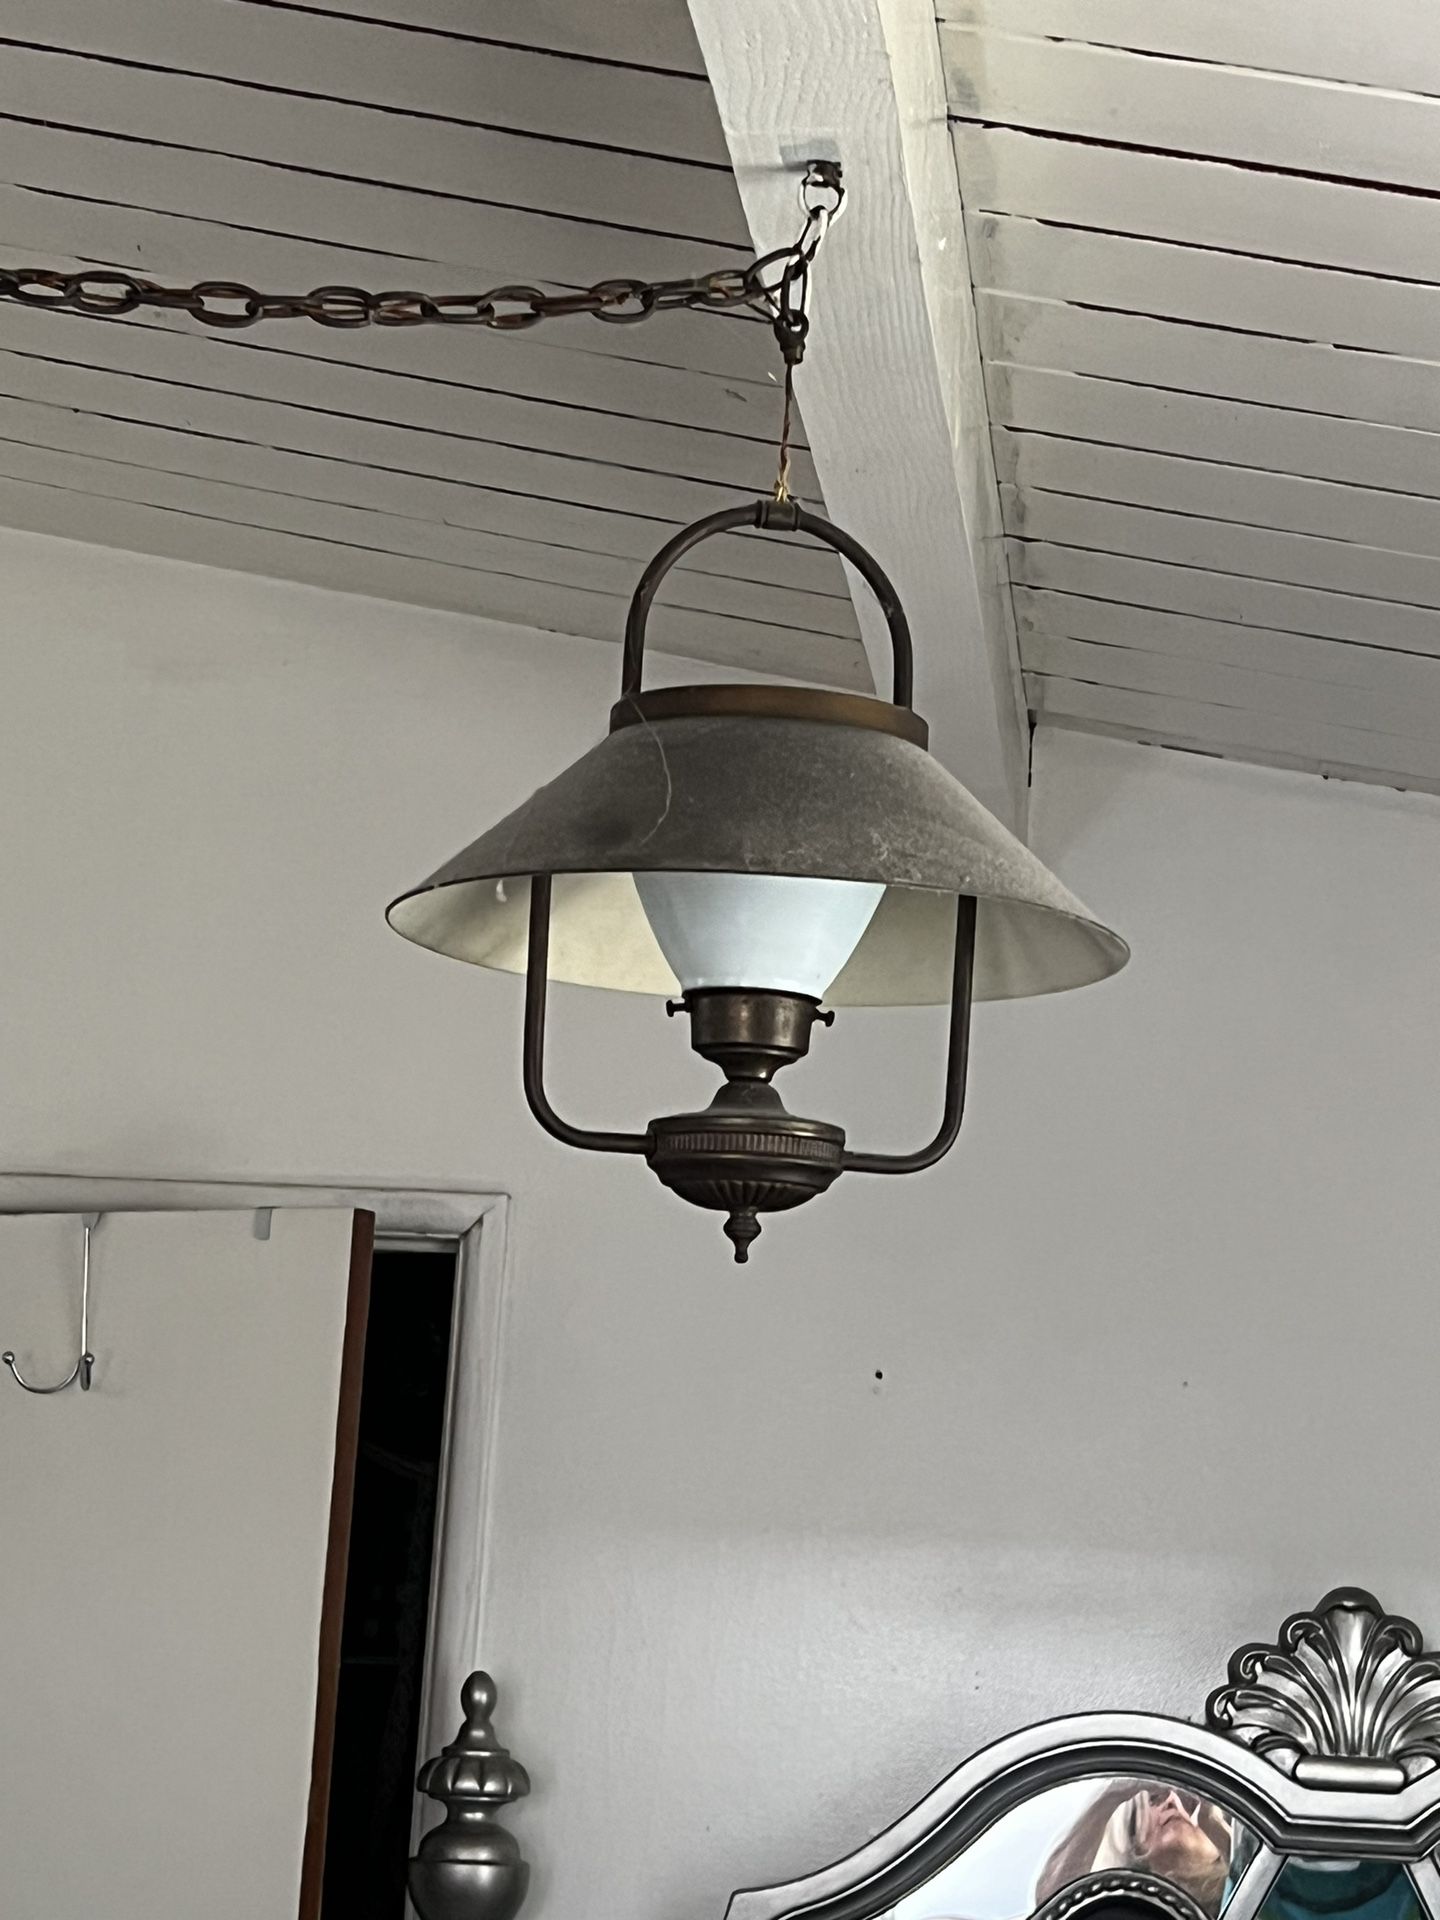 Antique Lamp Working Perfect 